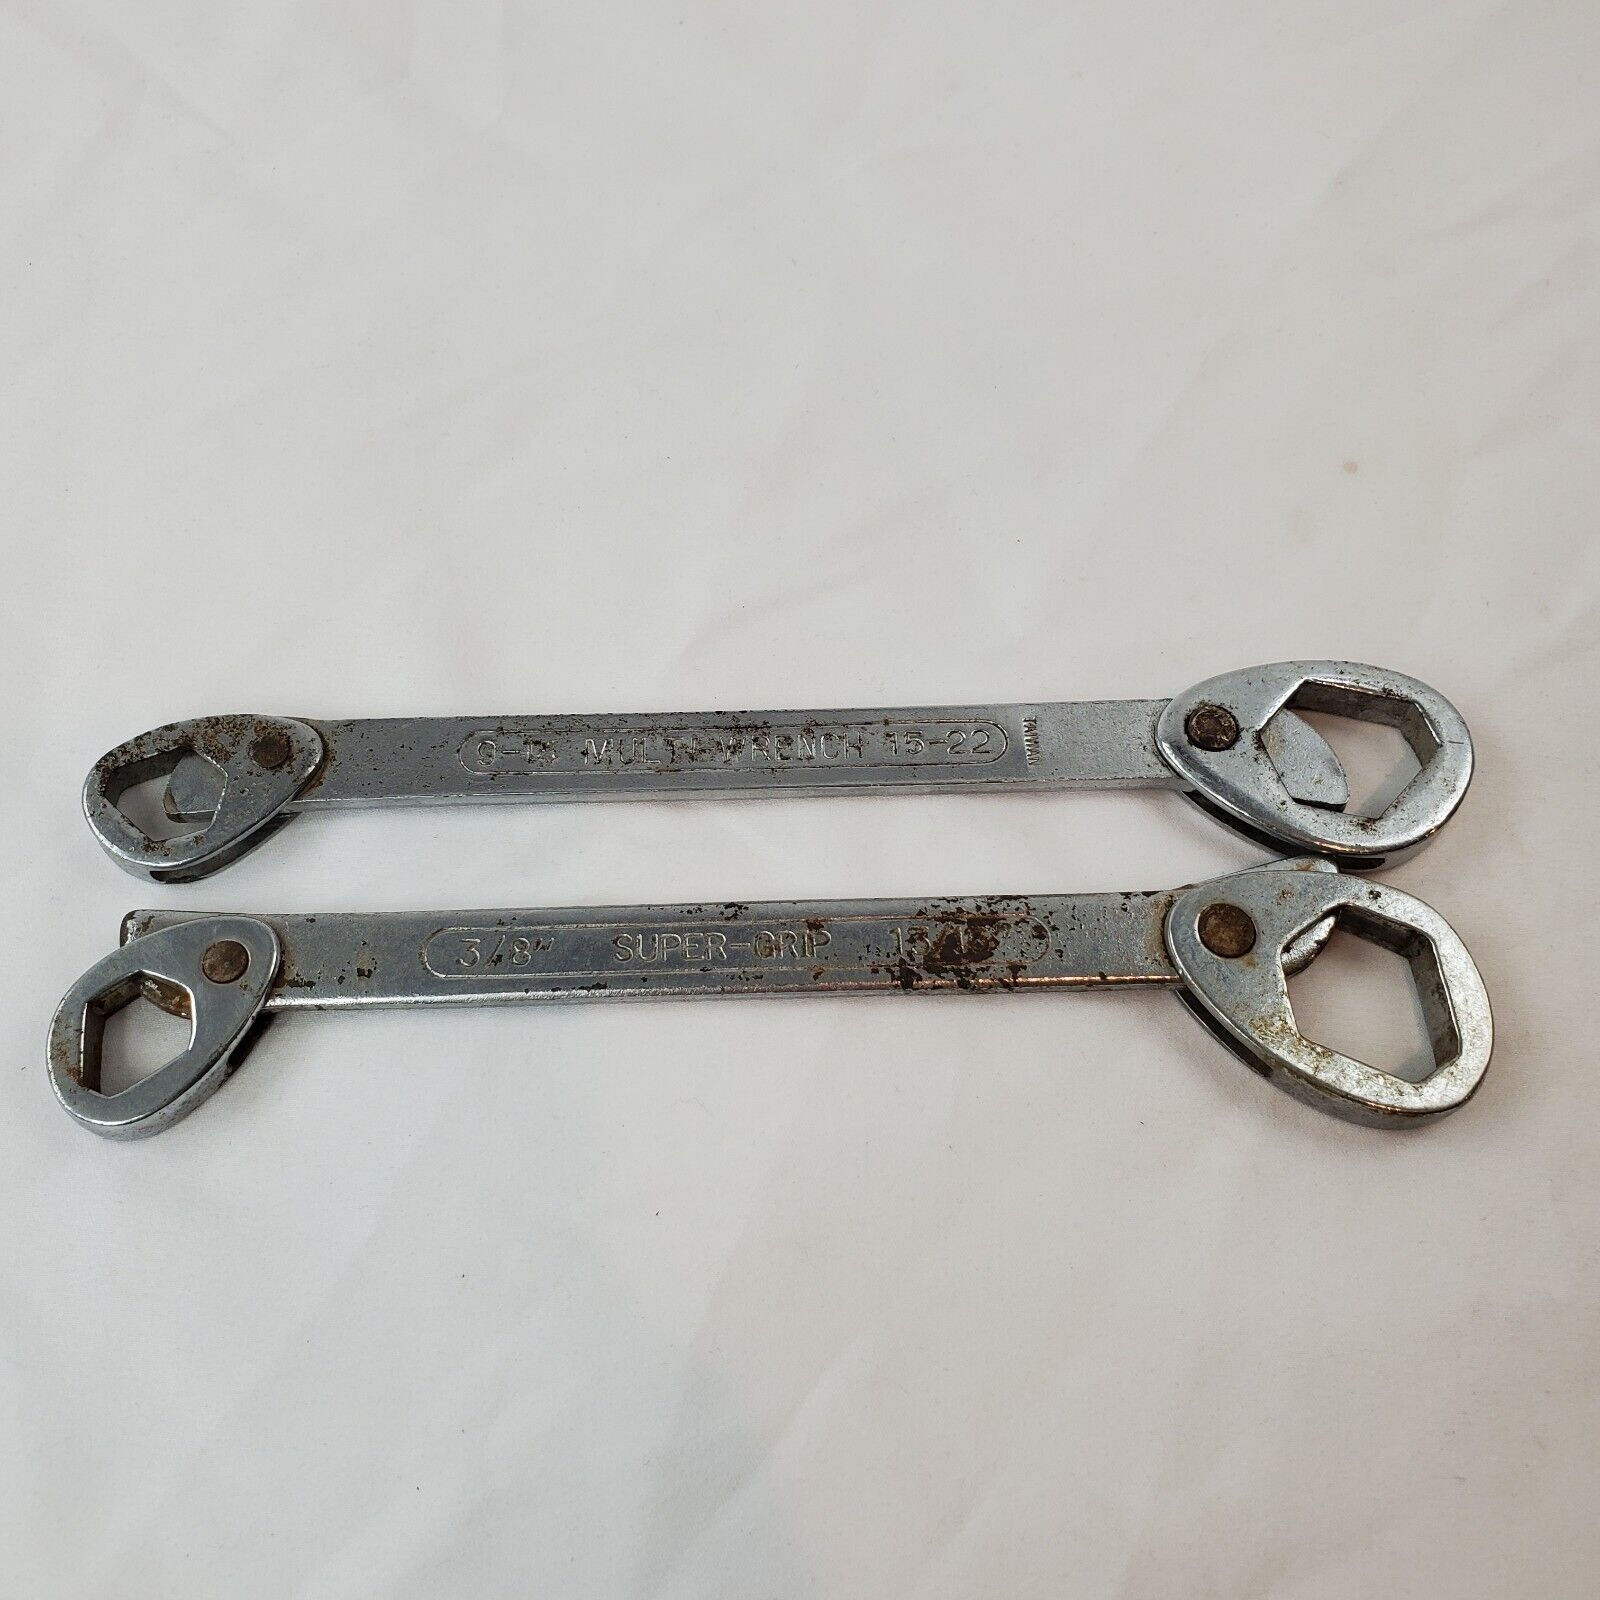 Vintage Heavy Duty Multi Wrench 9-14MM 15-22mm & Super Grip Wrench 3/8 13/16